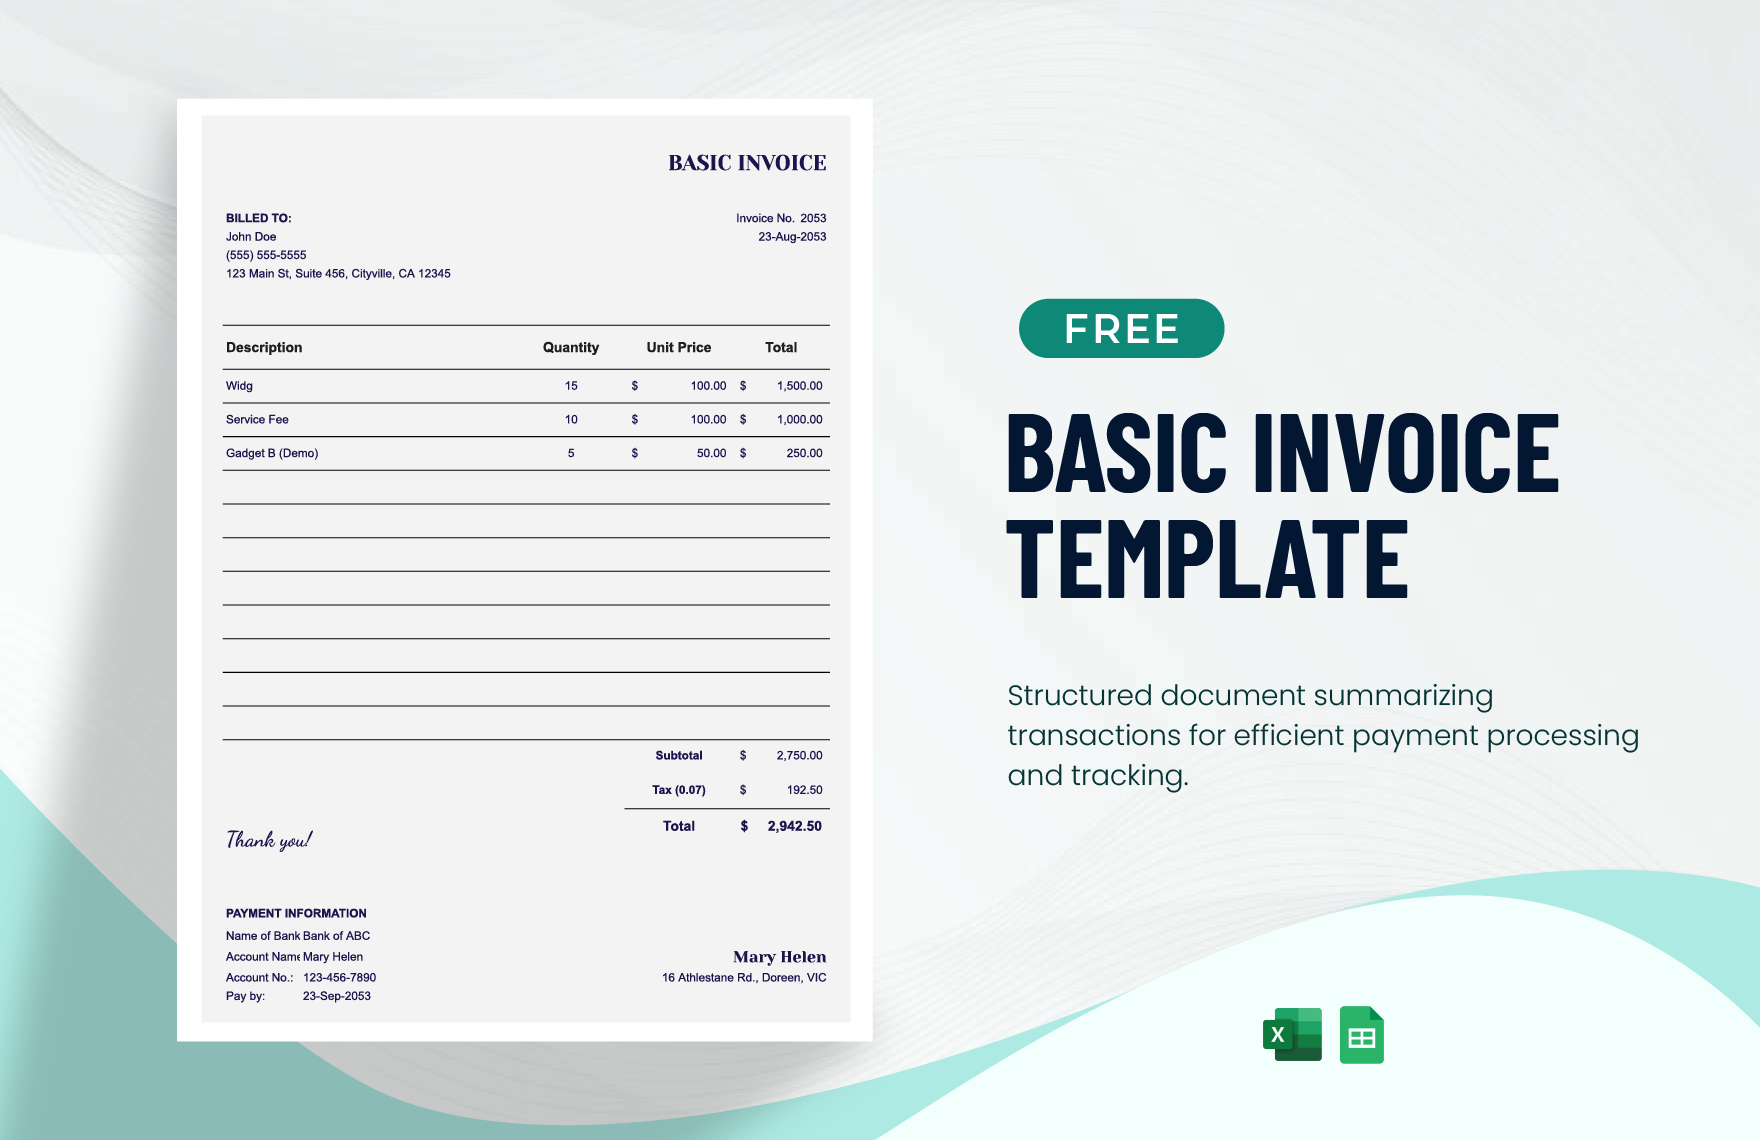 Basic Invoice Template in Excel, Google Sheets